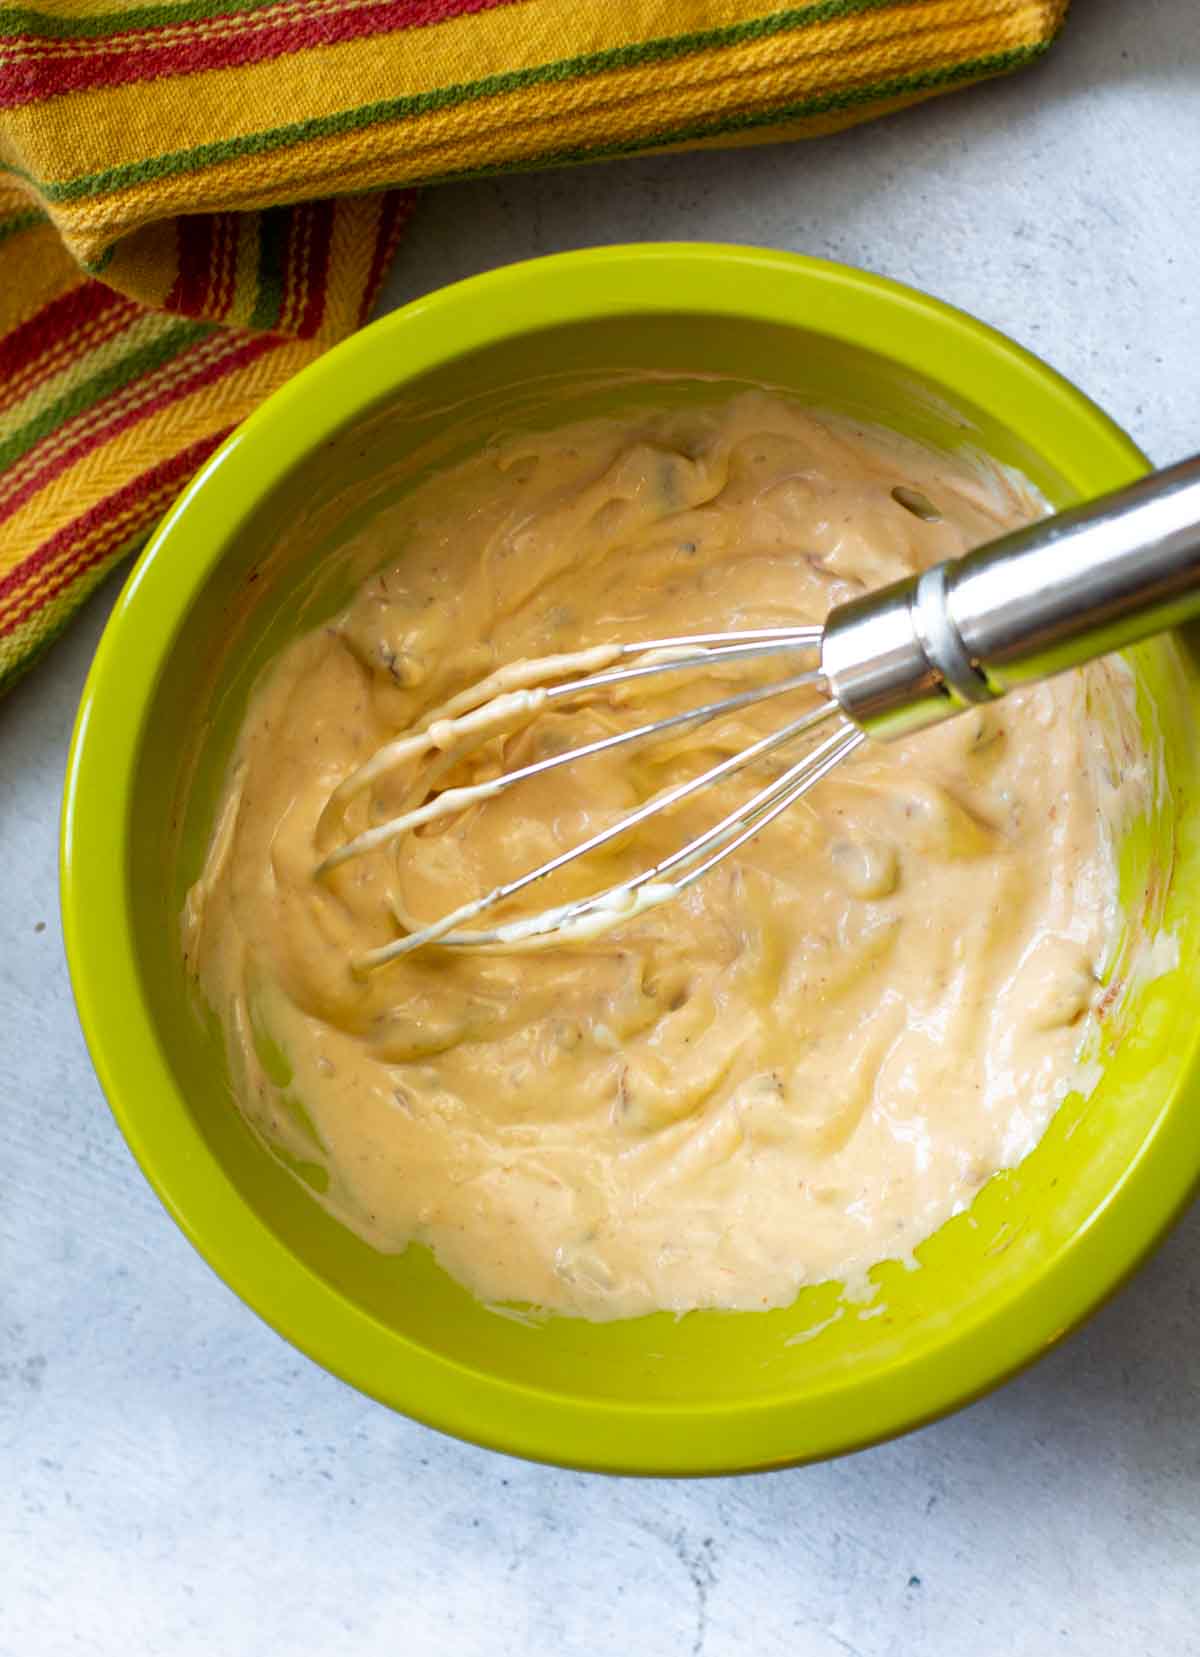 How to make Chipotle mayo.